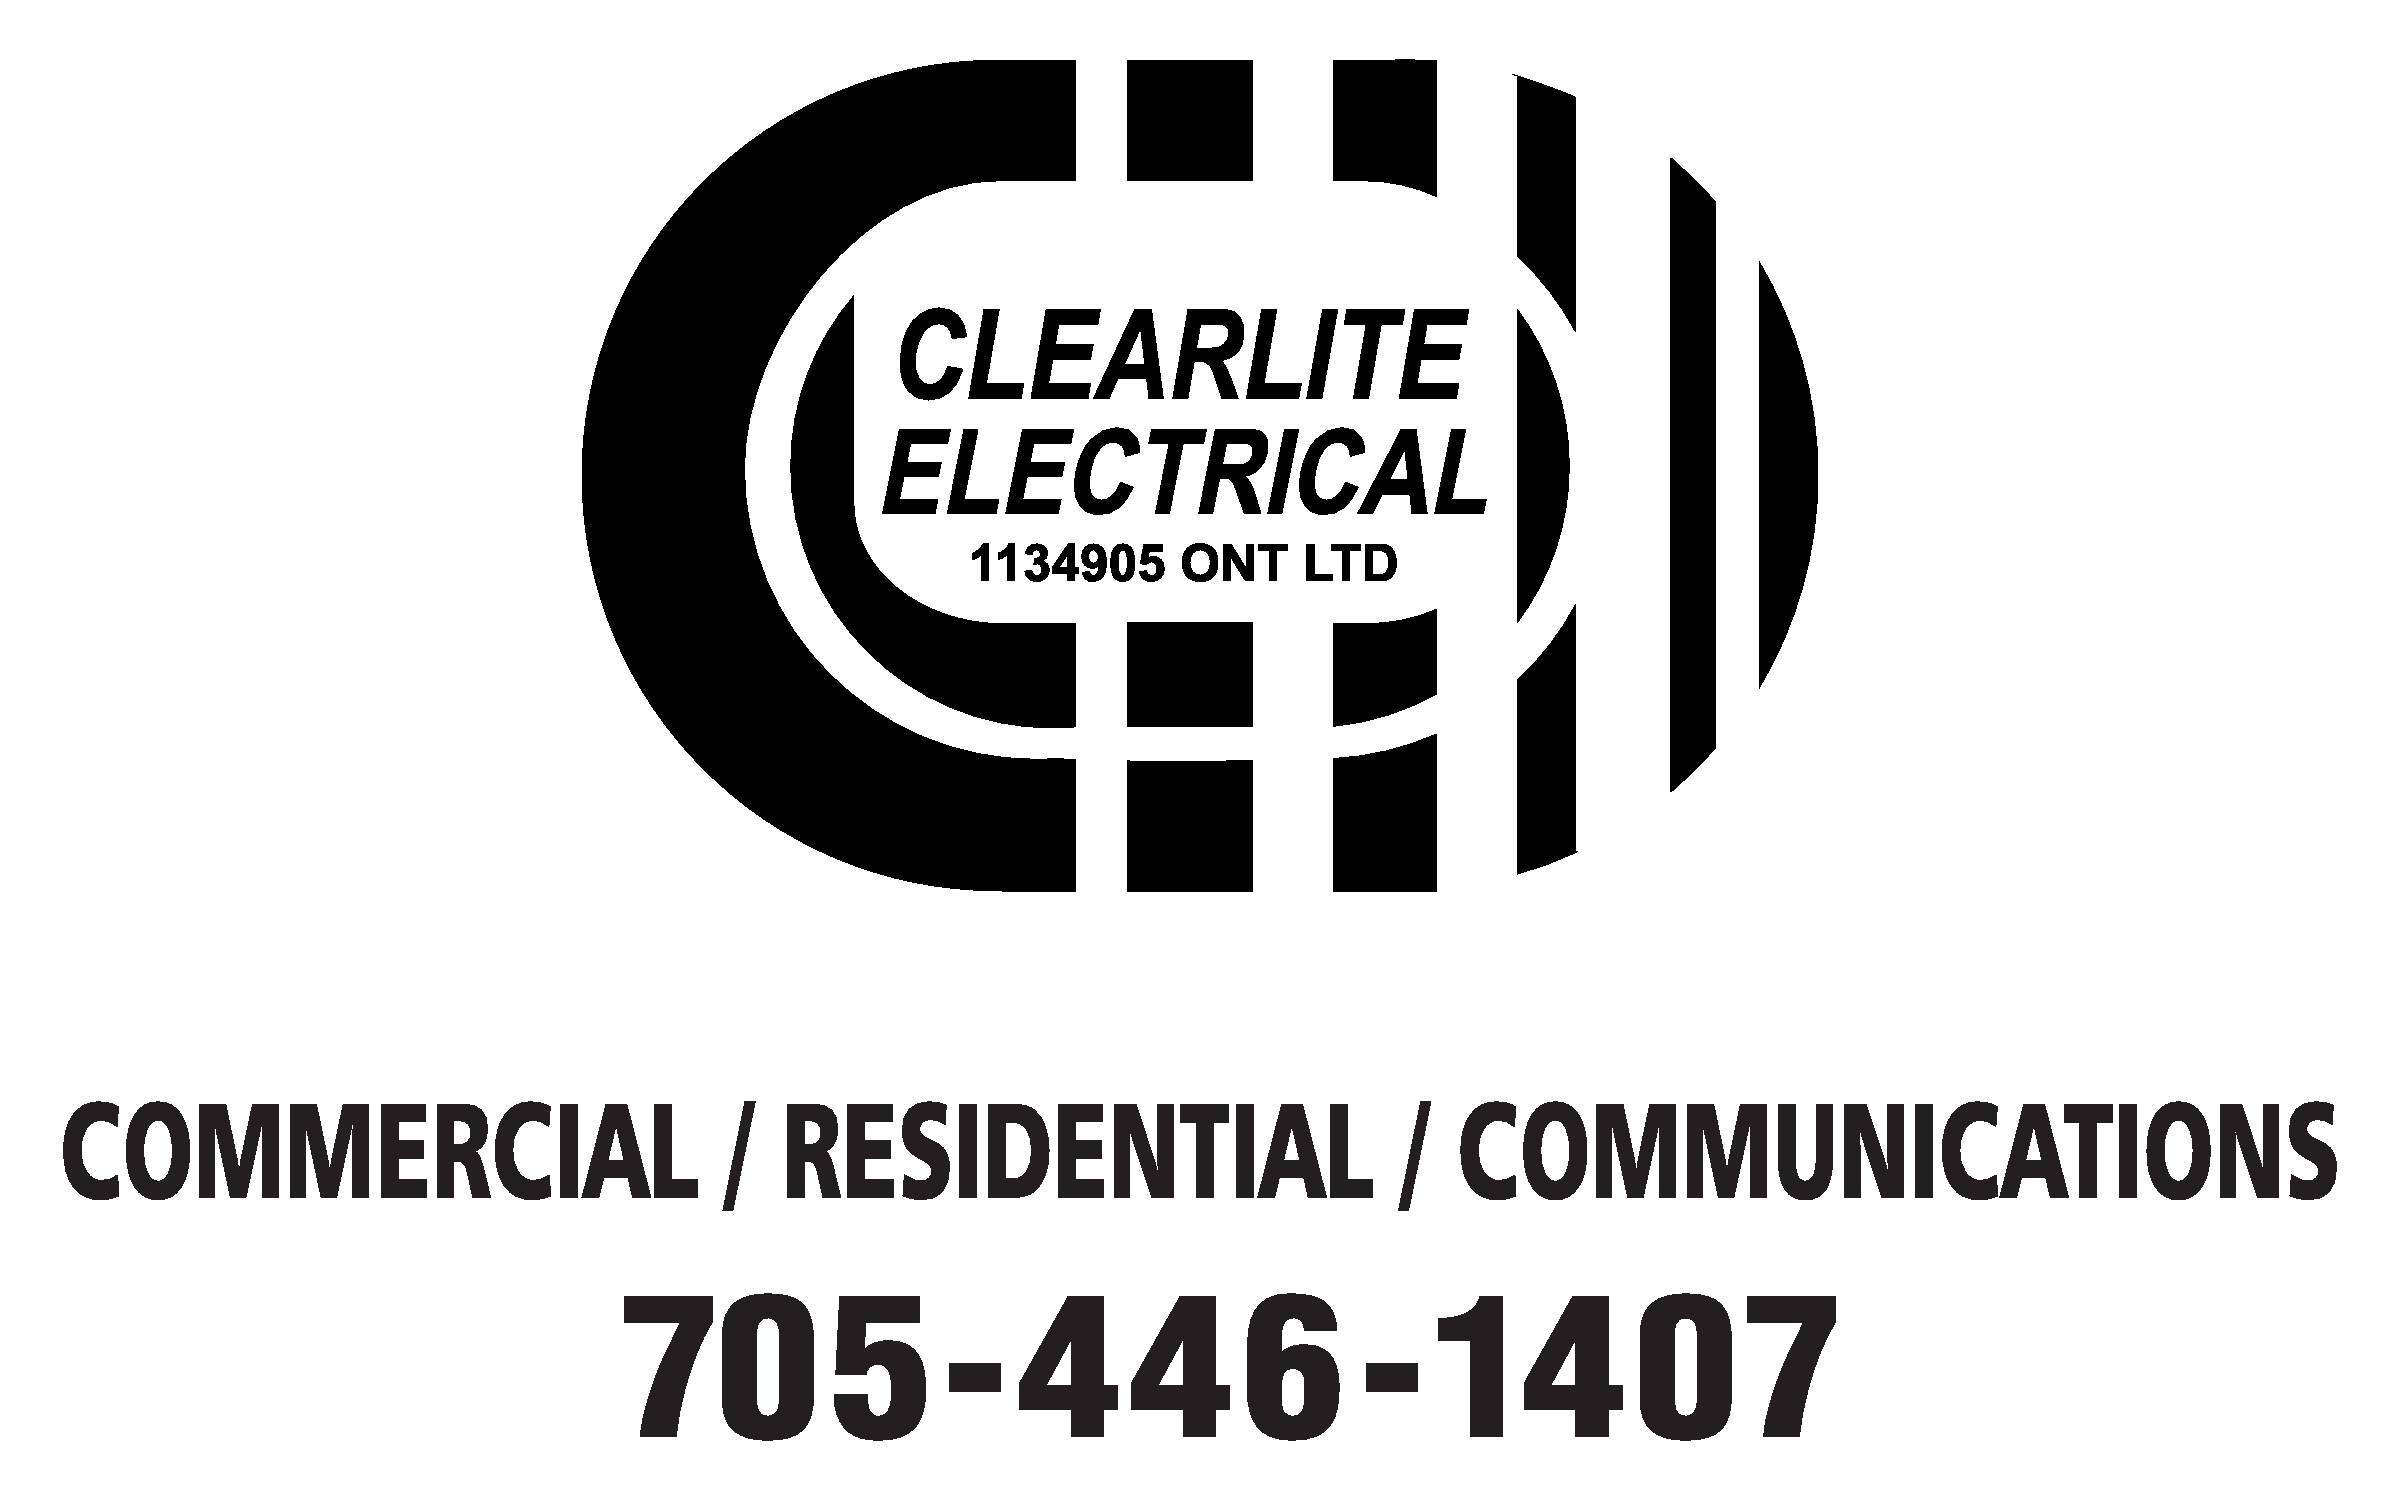 Clearlite Electrical